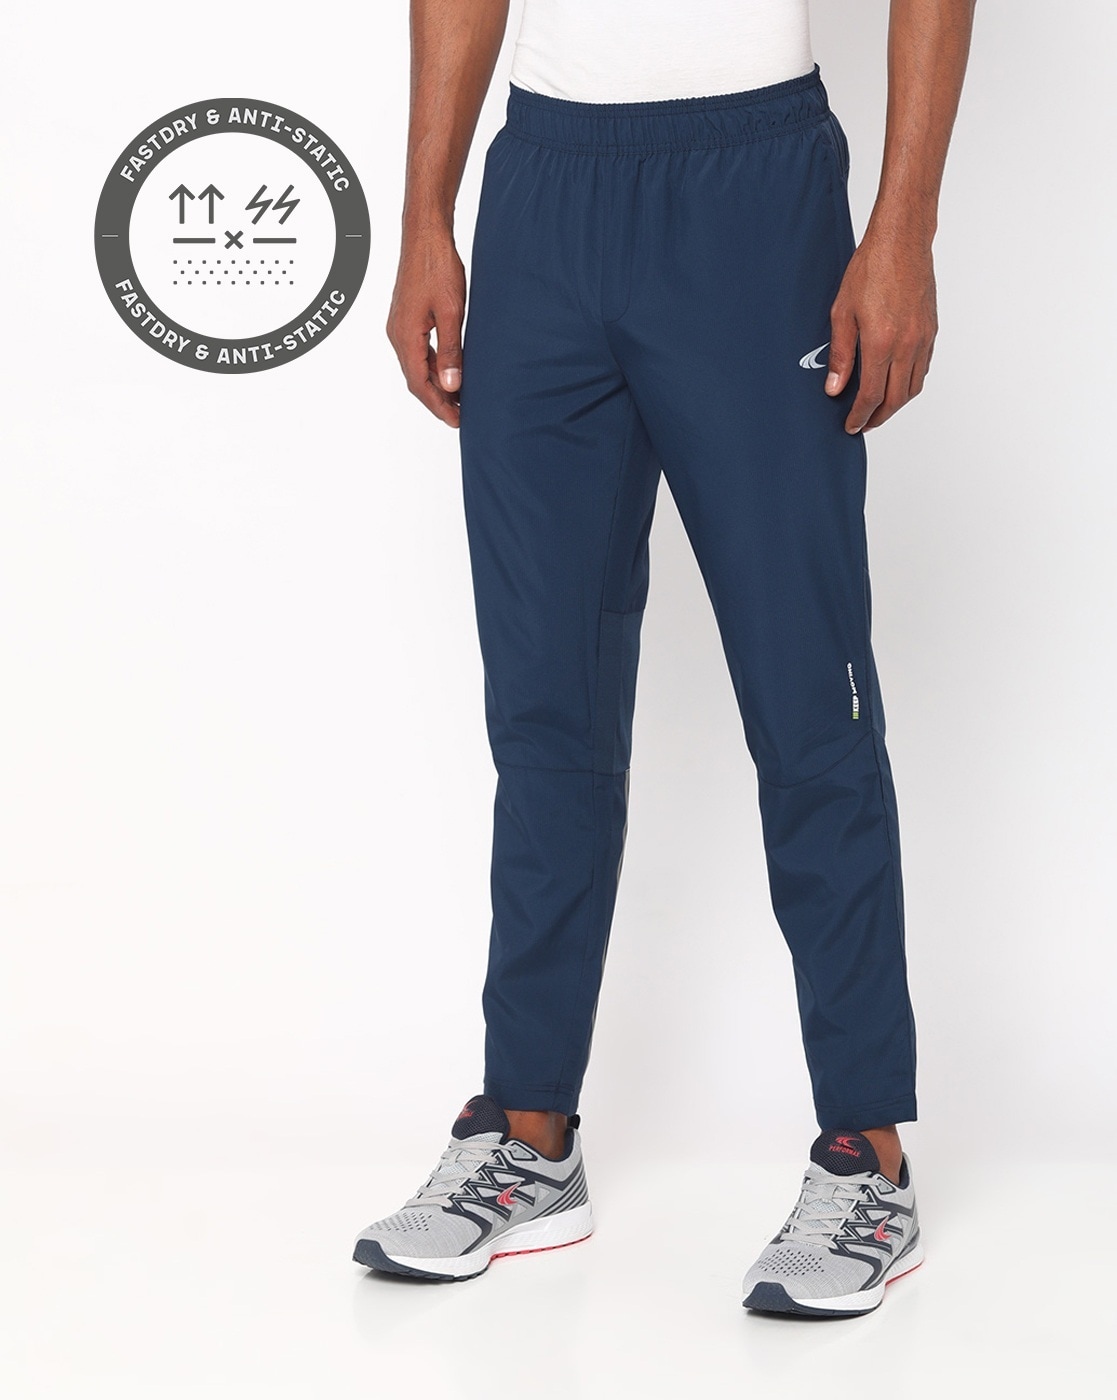 The Best Running Pants You Can Buy for Jogging Style and Comfort